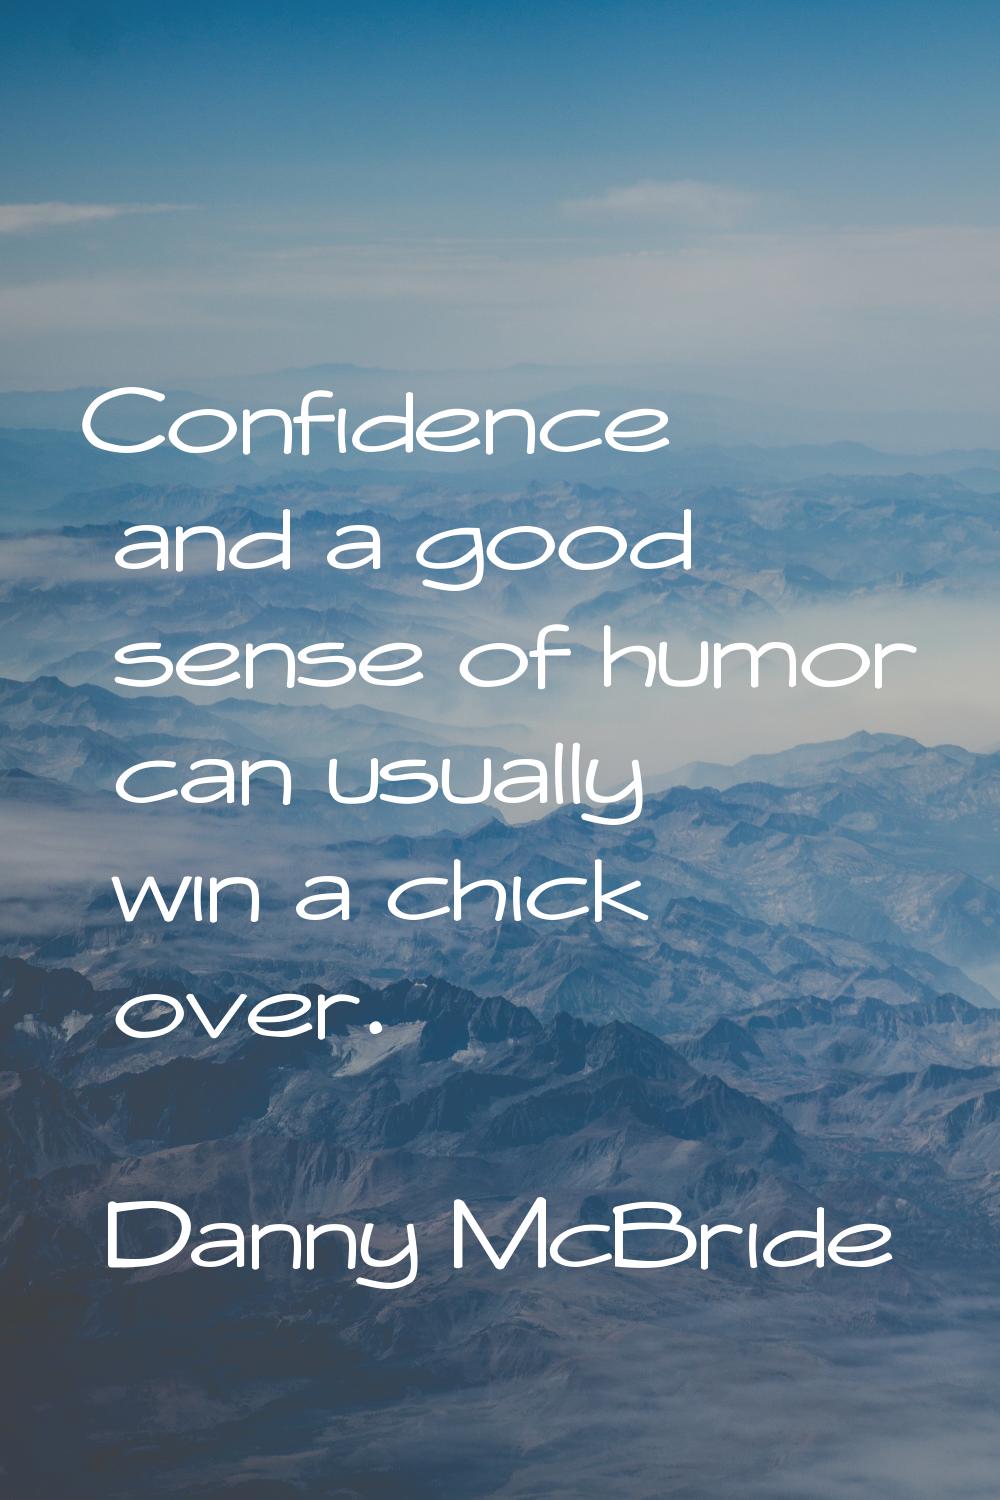 Confidence and a good sense of humor can usually win a chick over.